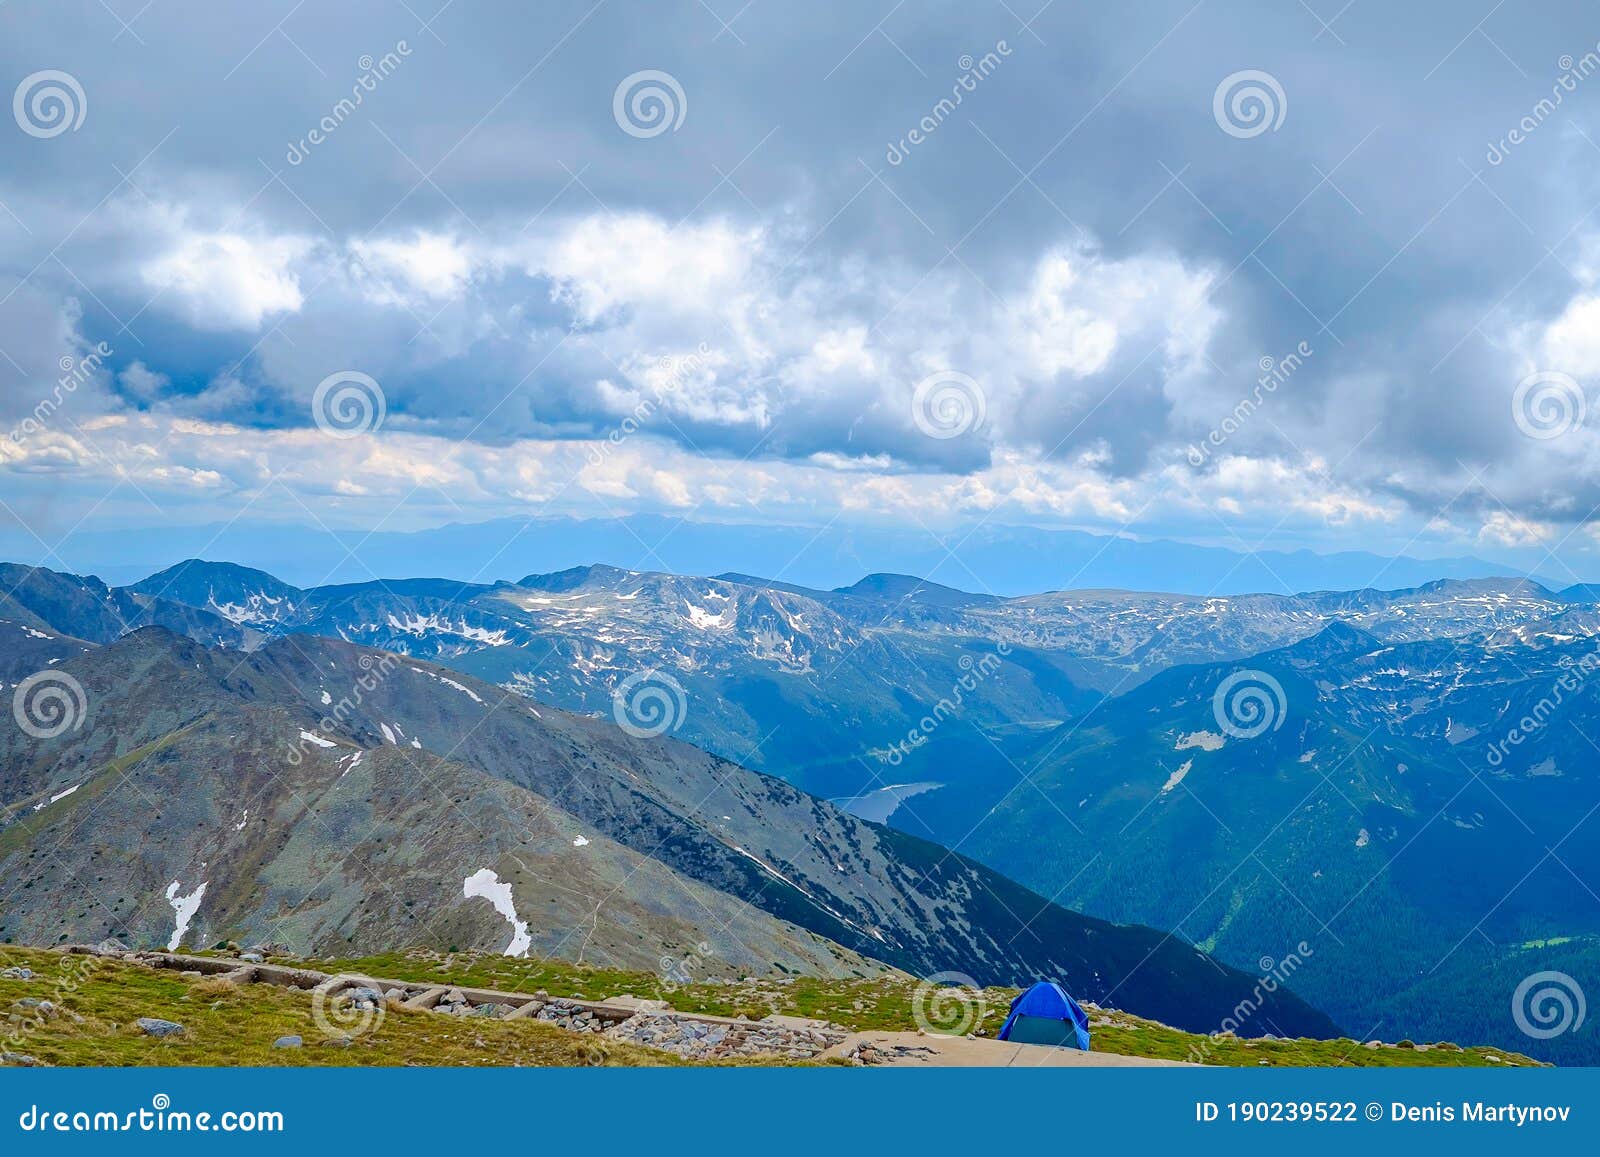 Panoramic Mountain View from the Top 5 Stock Photo - Image of blue ...